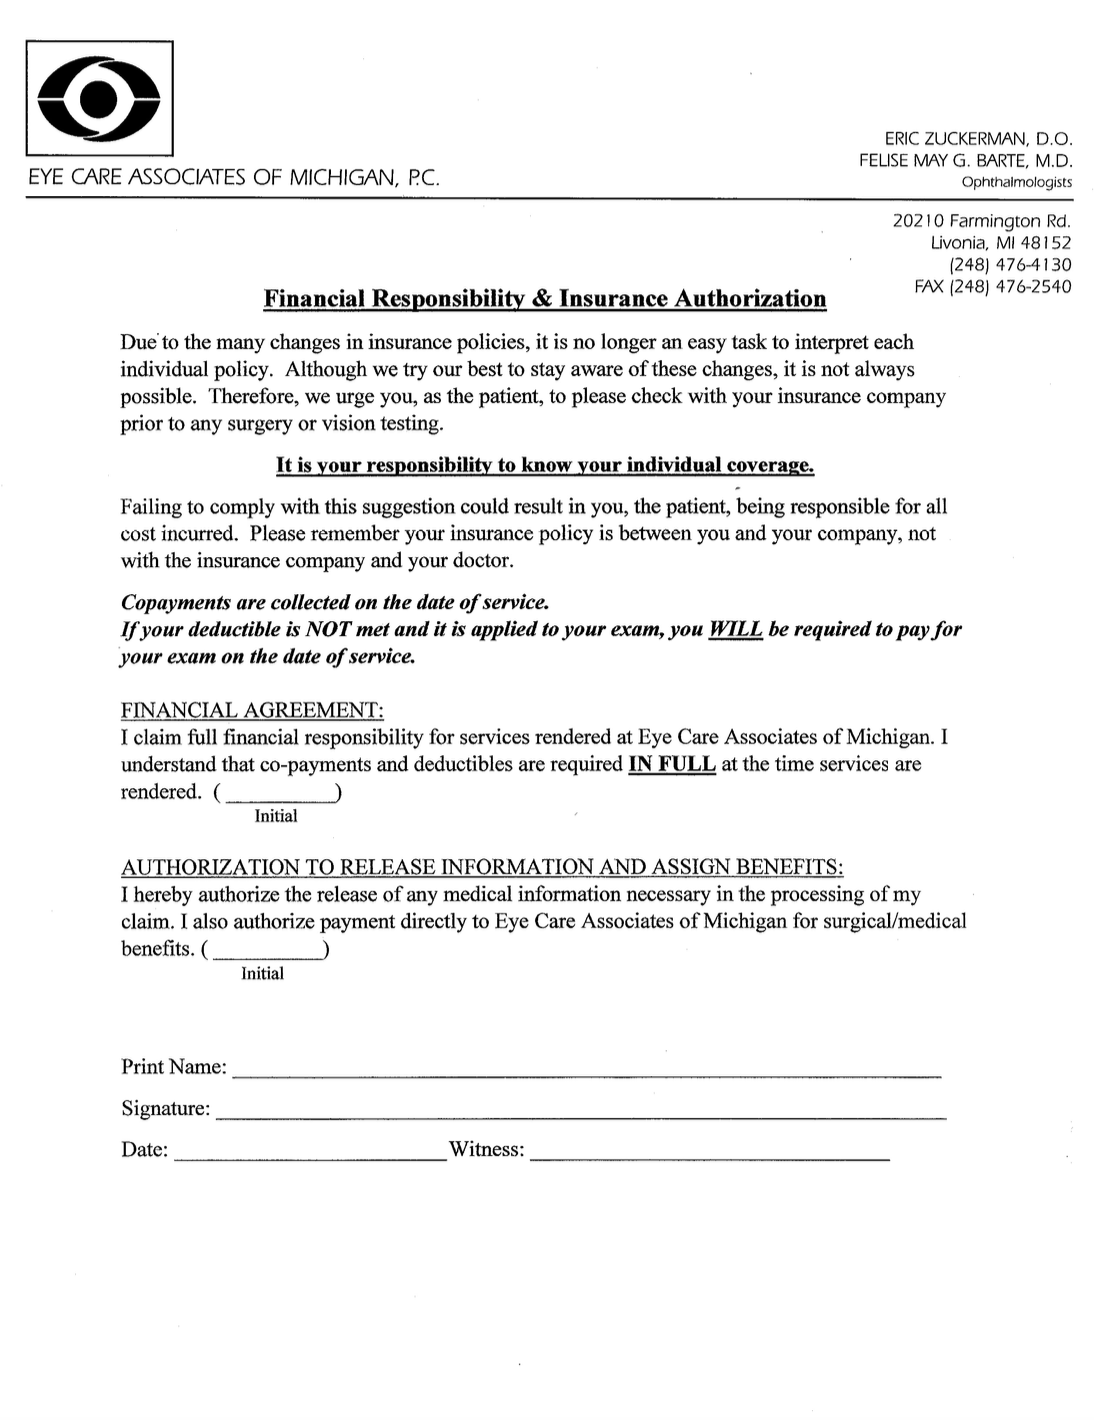 Patient Financial Responsibility Agreement Template